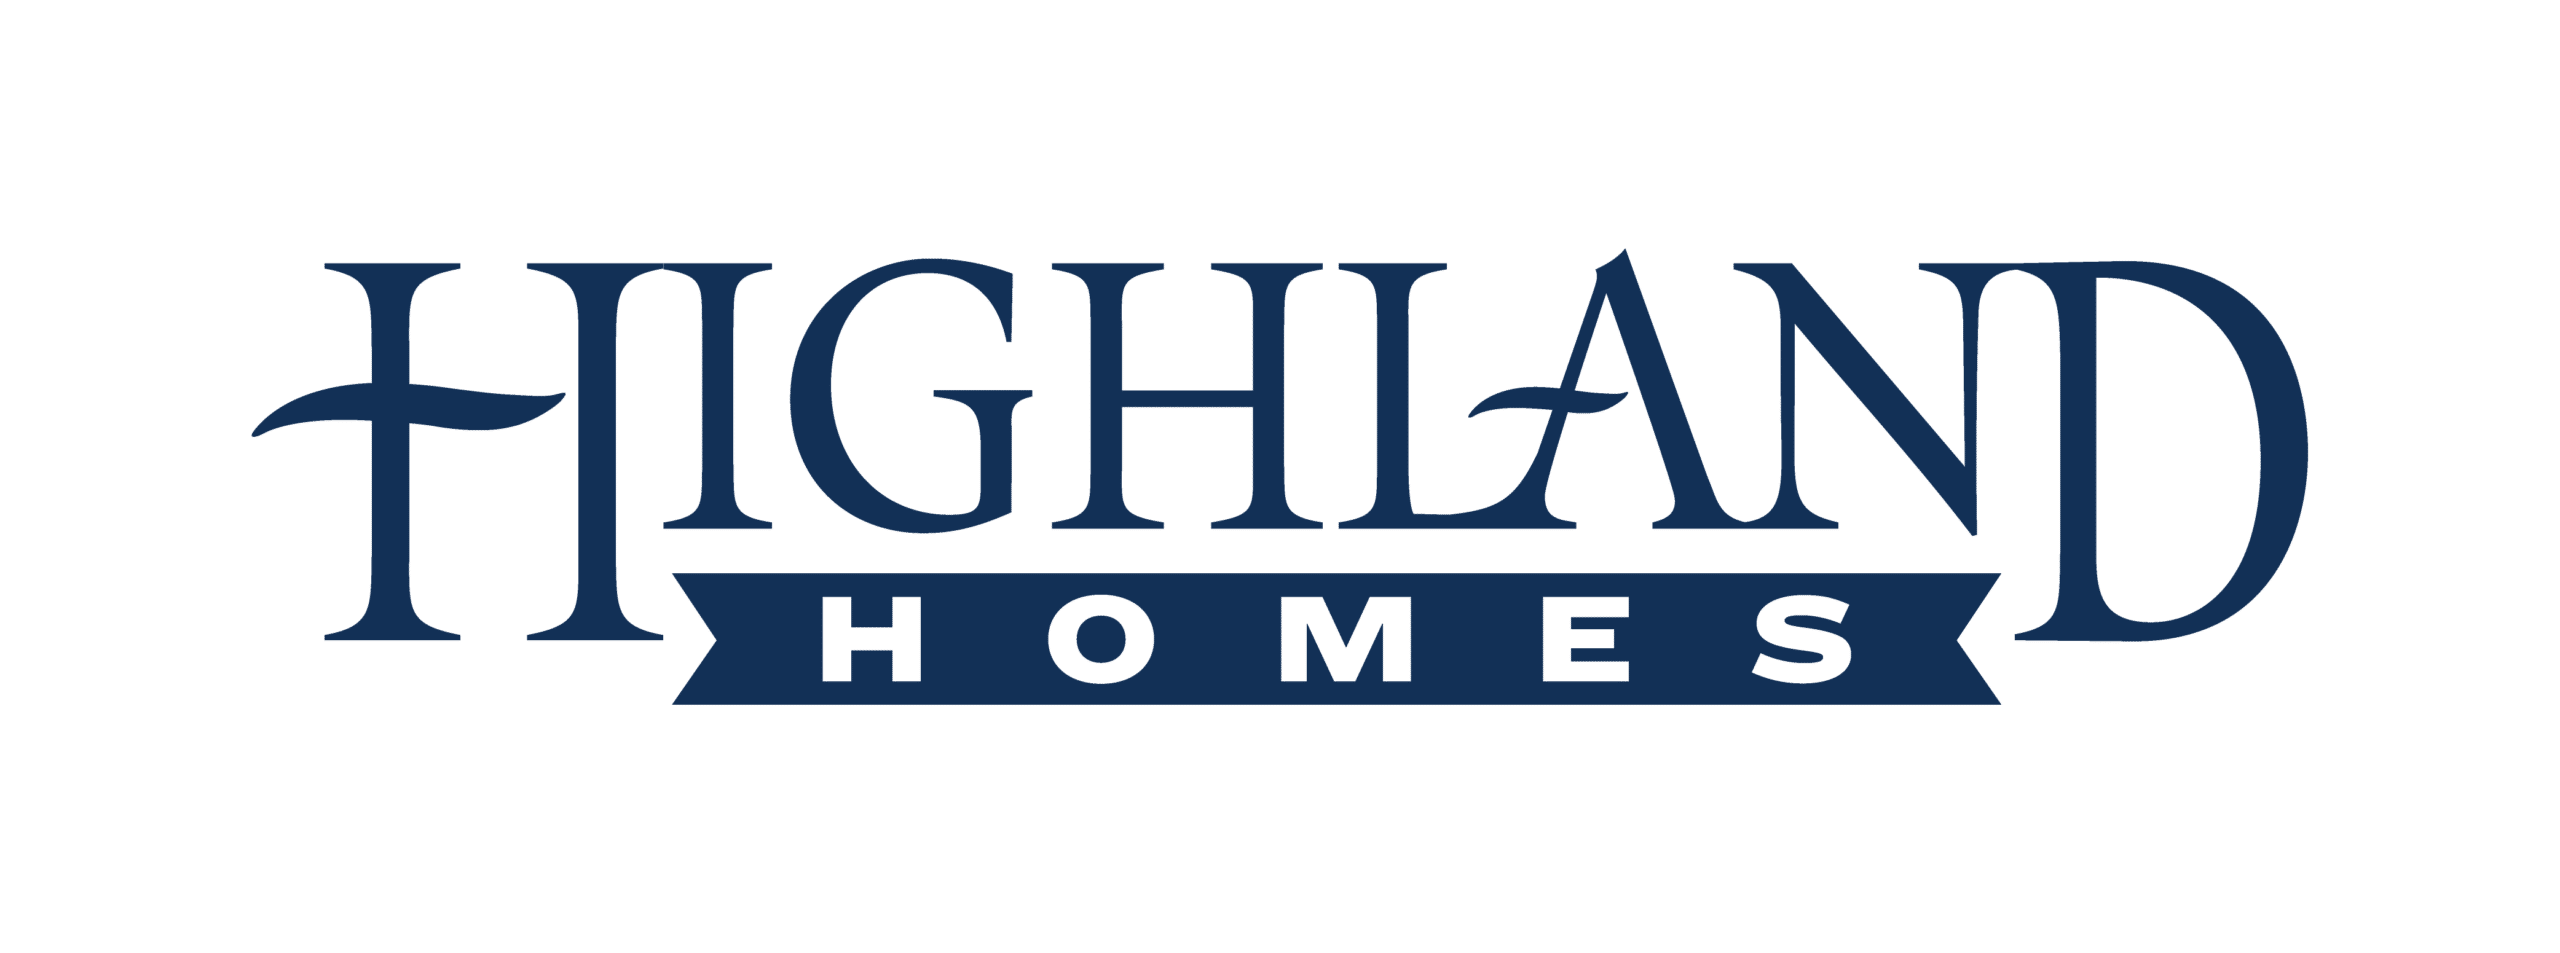 Highland Homes Townhome